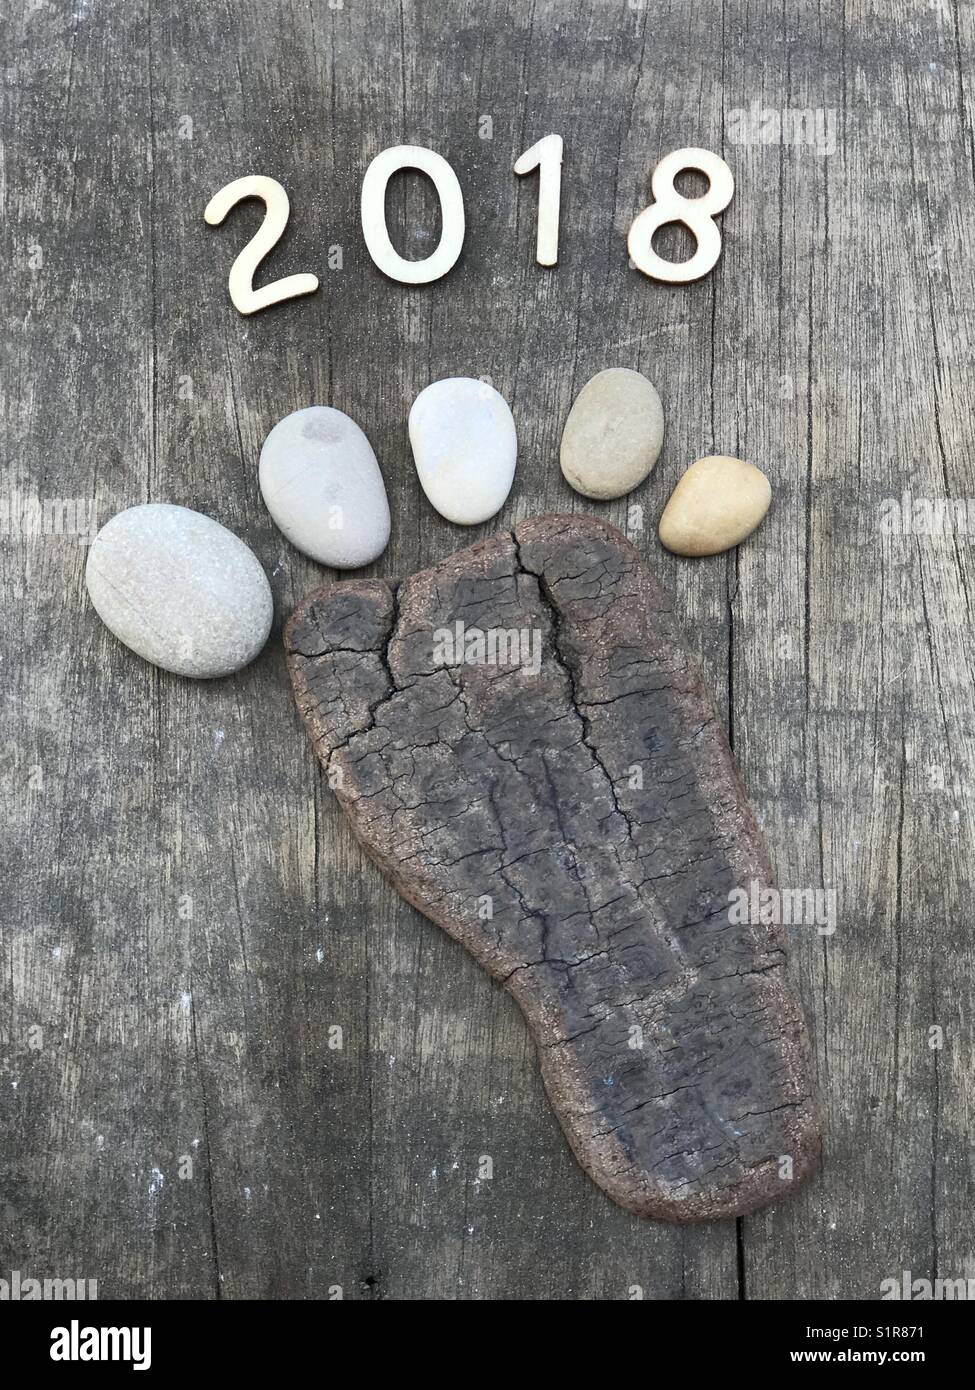 Another step in a new year, happy 2018 ! Stock Photo